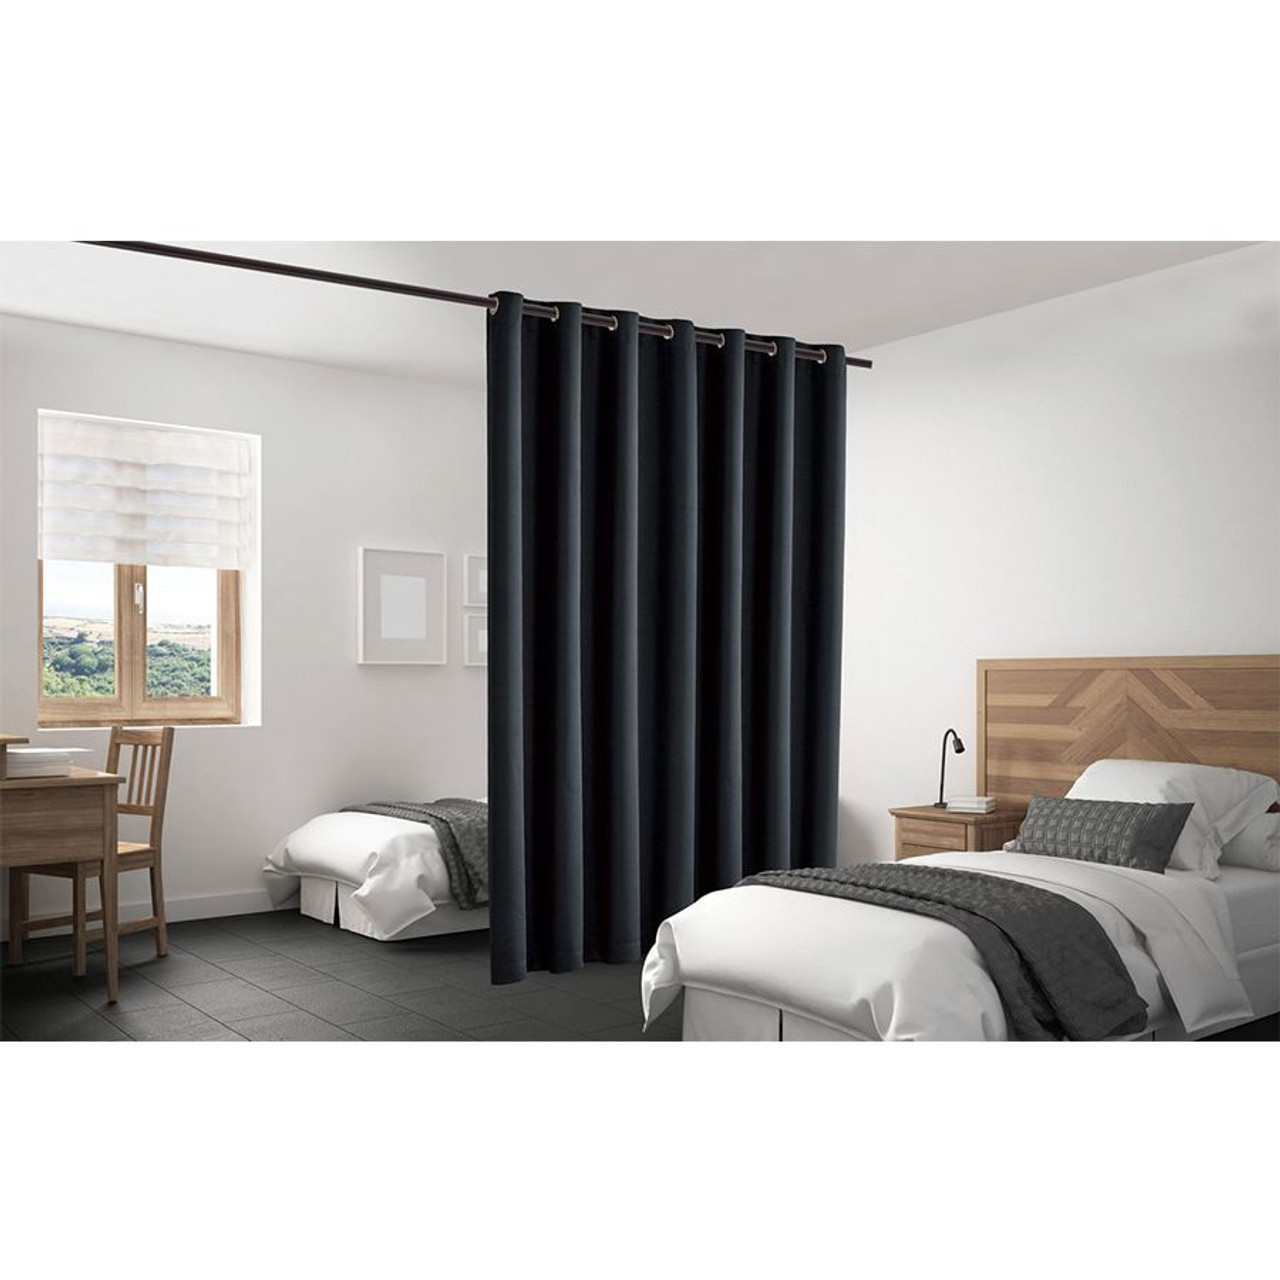 Blackout Room Divider Curtain Panel Thermal Insulated Black Color